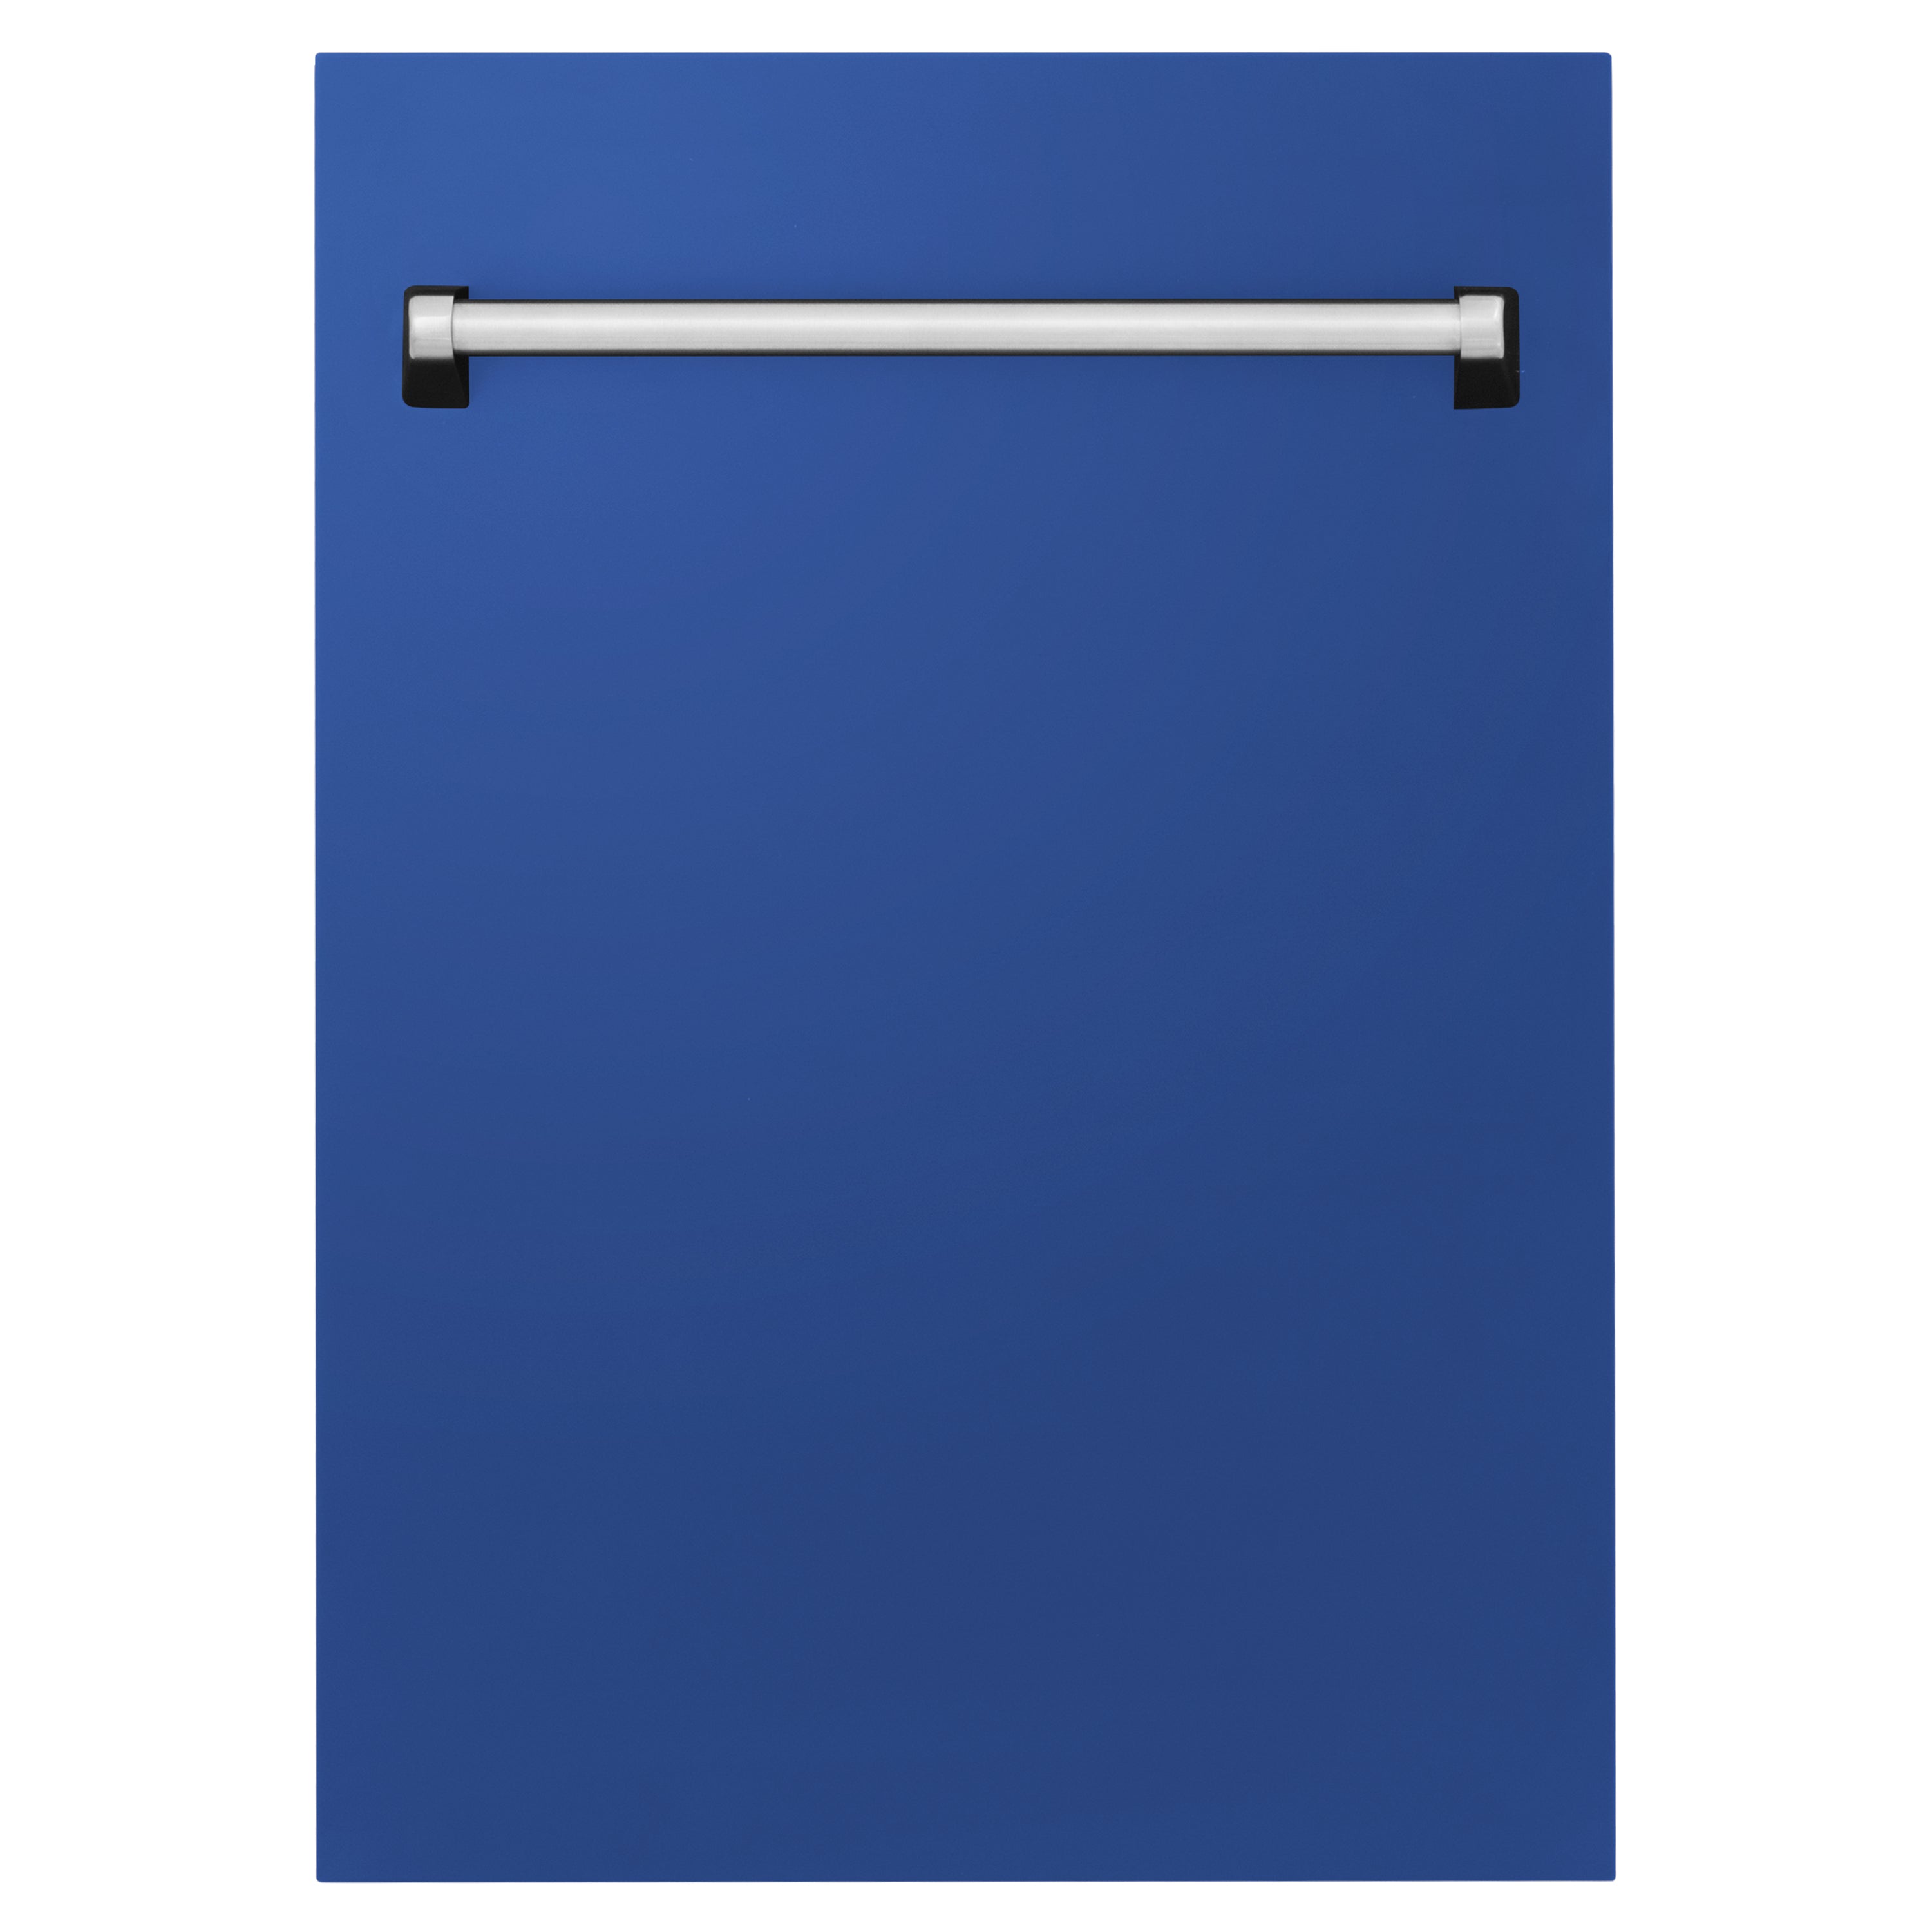 ZLINE 18" Tallac Dishwasher Panel in Blue Matte with Traditional Handle (DPV-BM-18)